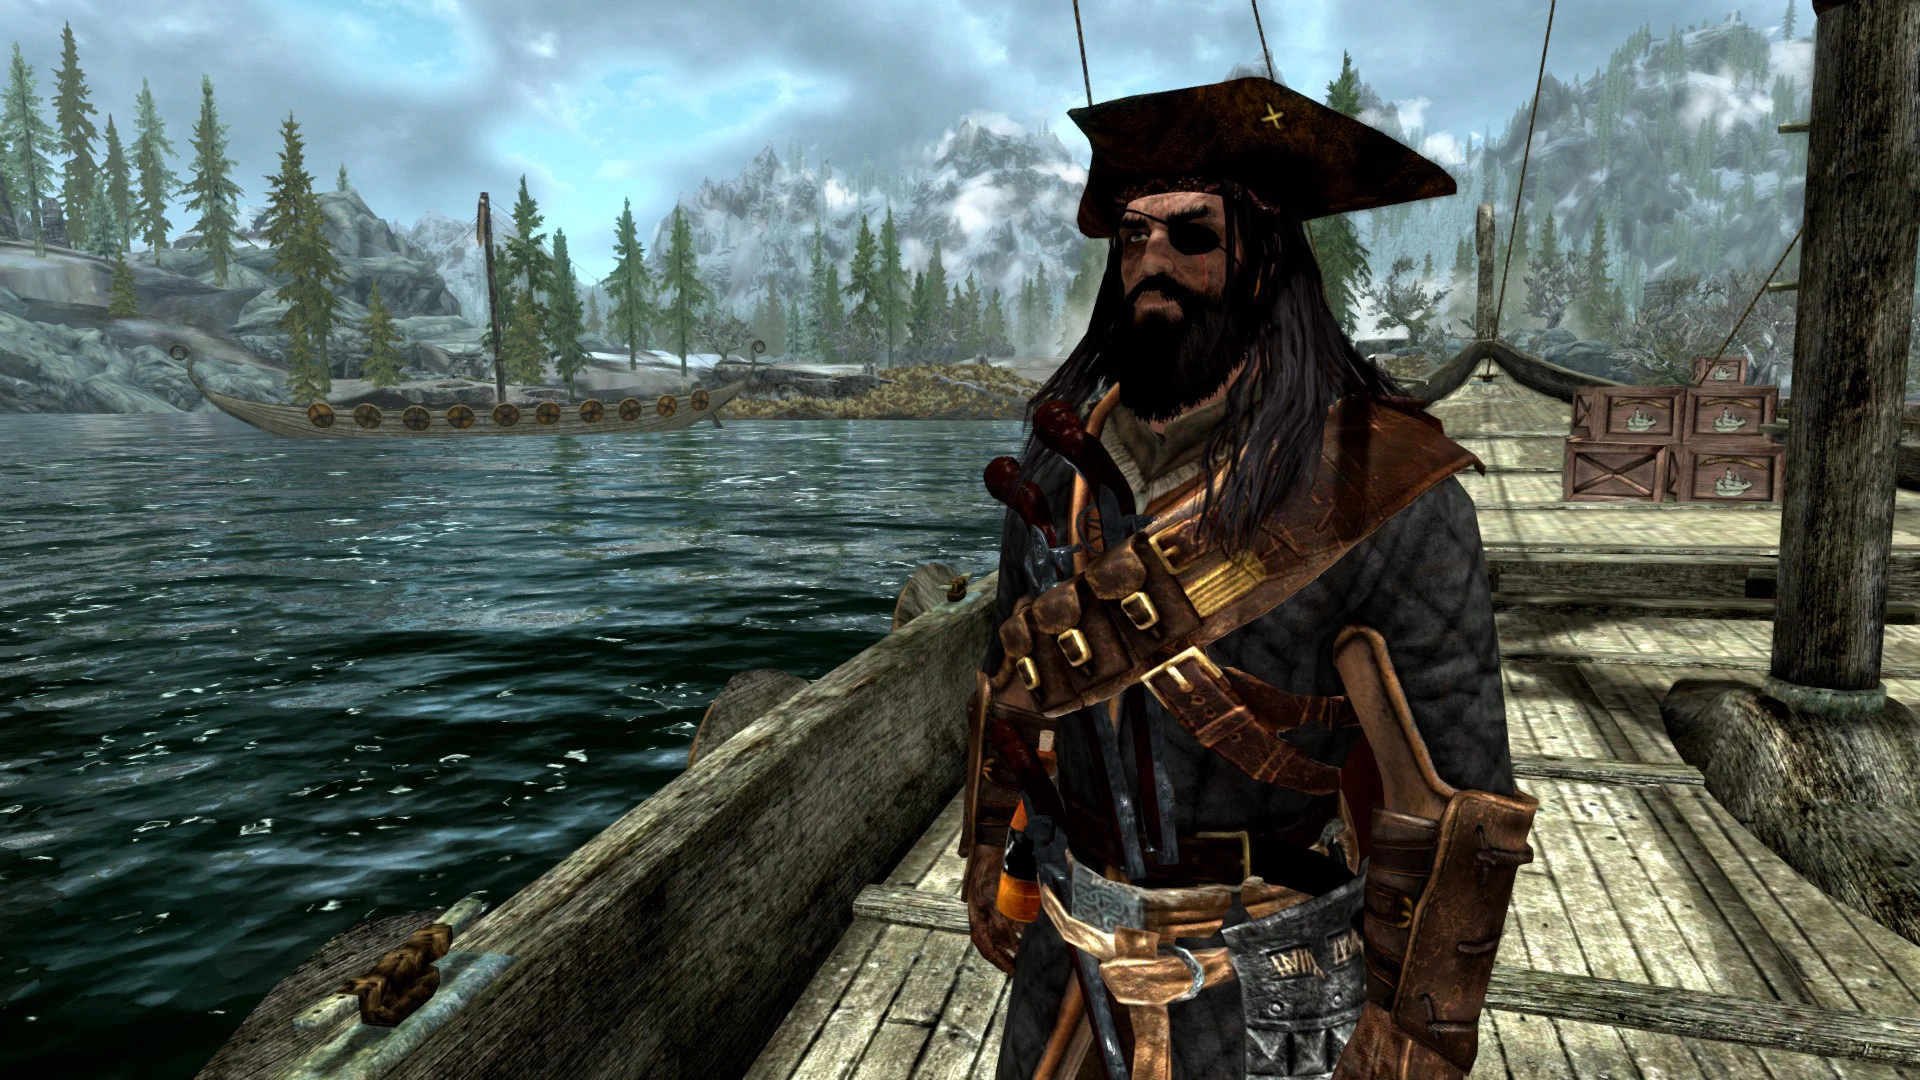 pirates of the caribbean skyrim special edition mod